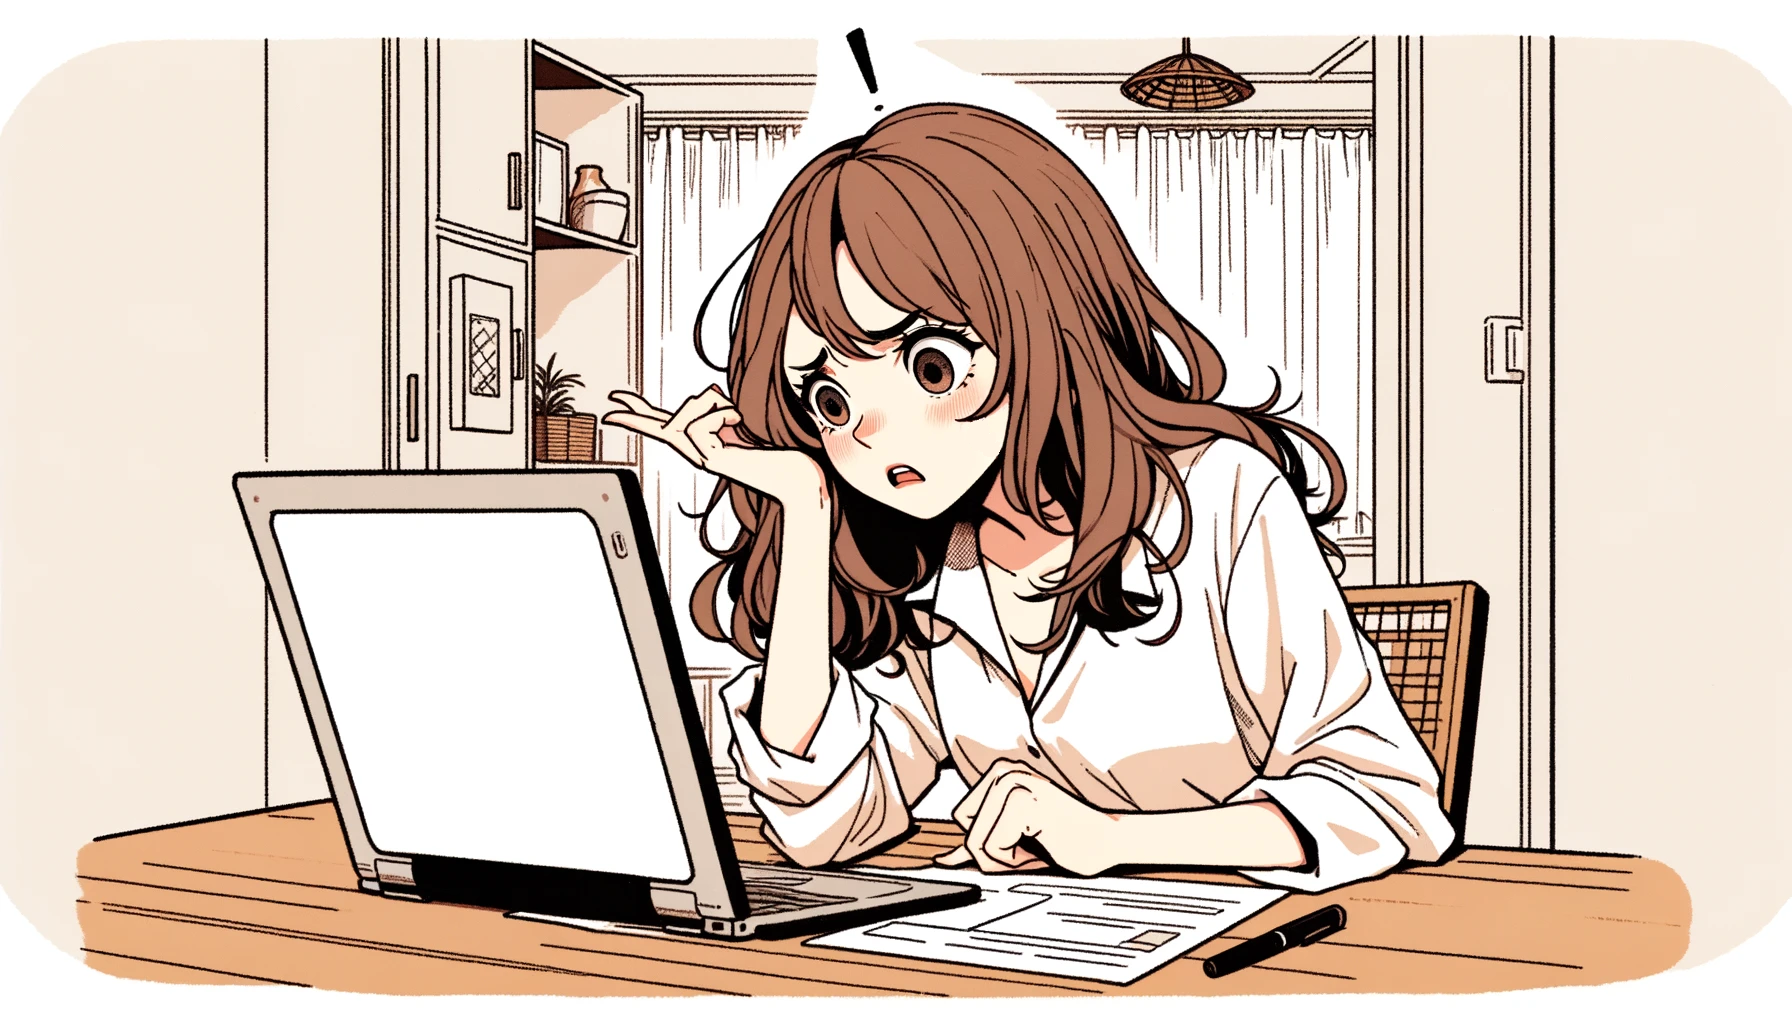 An illustration of a woman with semi-long hair, looking frustrated and confused in front of a laptop, set in a home office. She is leaning forward towards the screen, trying to decipher the problem. The style is simple and clean, with minimal background details, focusing on the woman and the laptop. The illustration is wide and adopts a style reminiscent of vintage Japanese girl manga, using bright, almost primary colors (marker, pastel colors) to effectively convey the scene's dynamism and expressiveness.